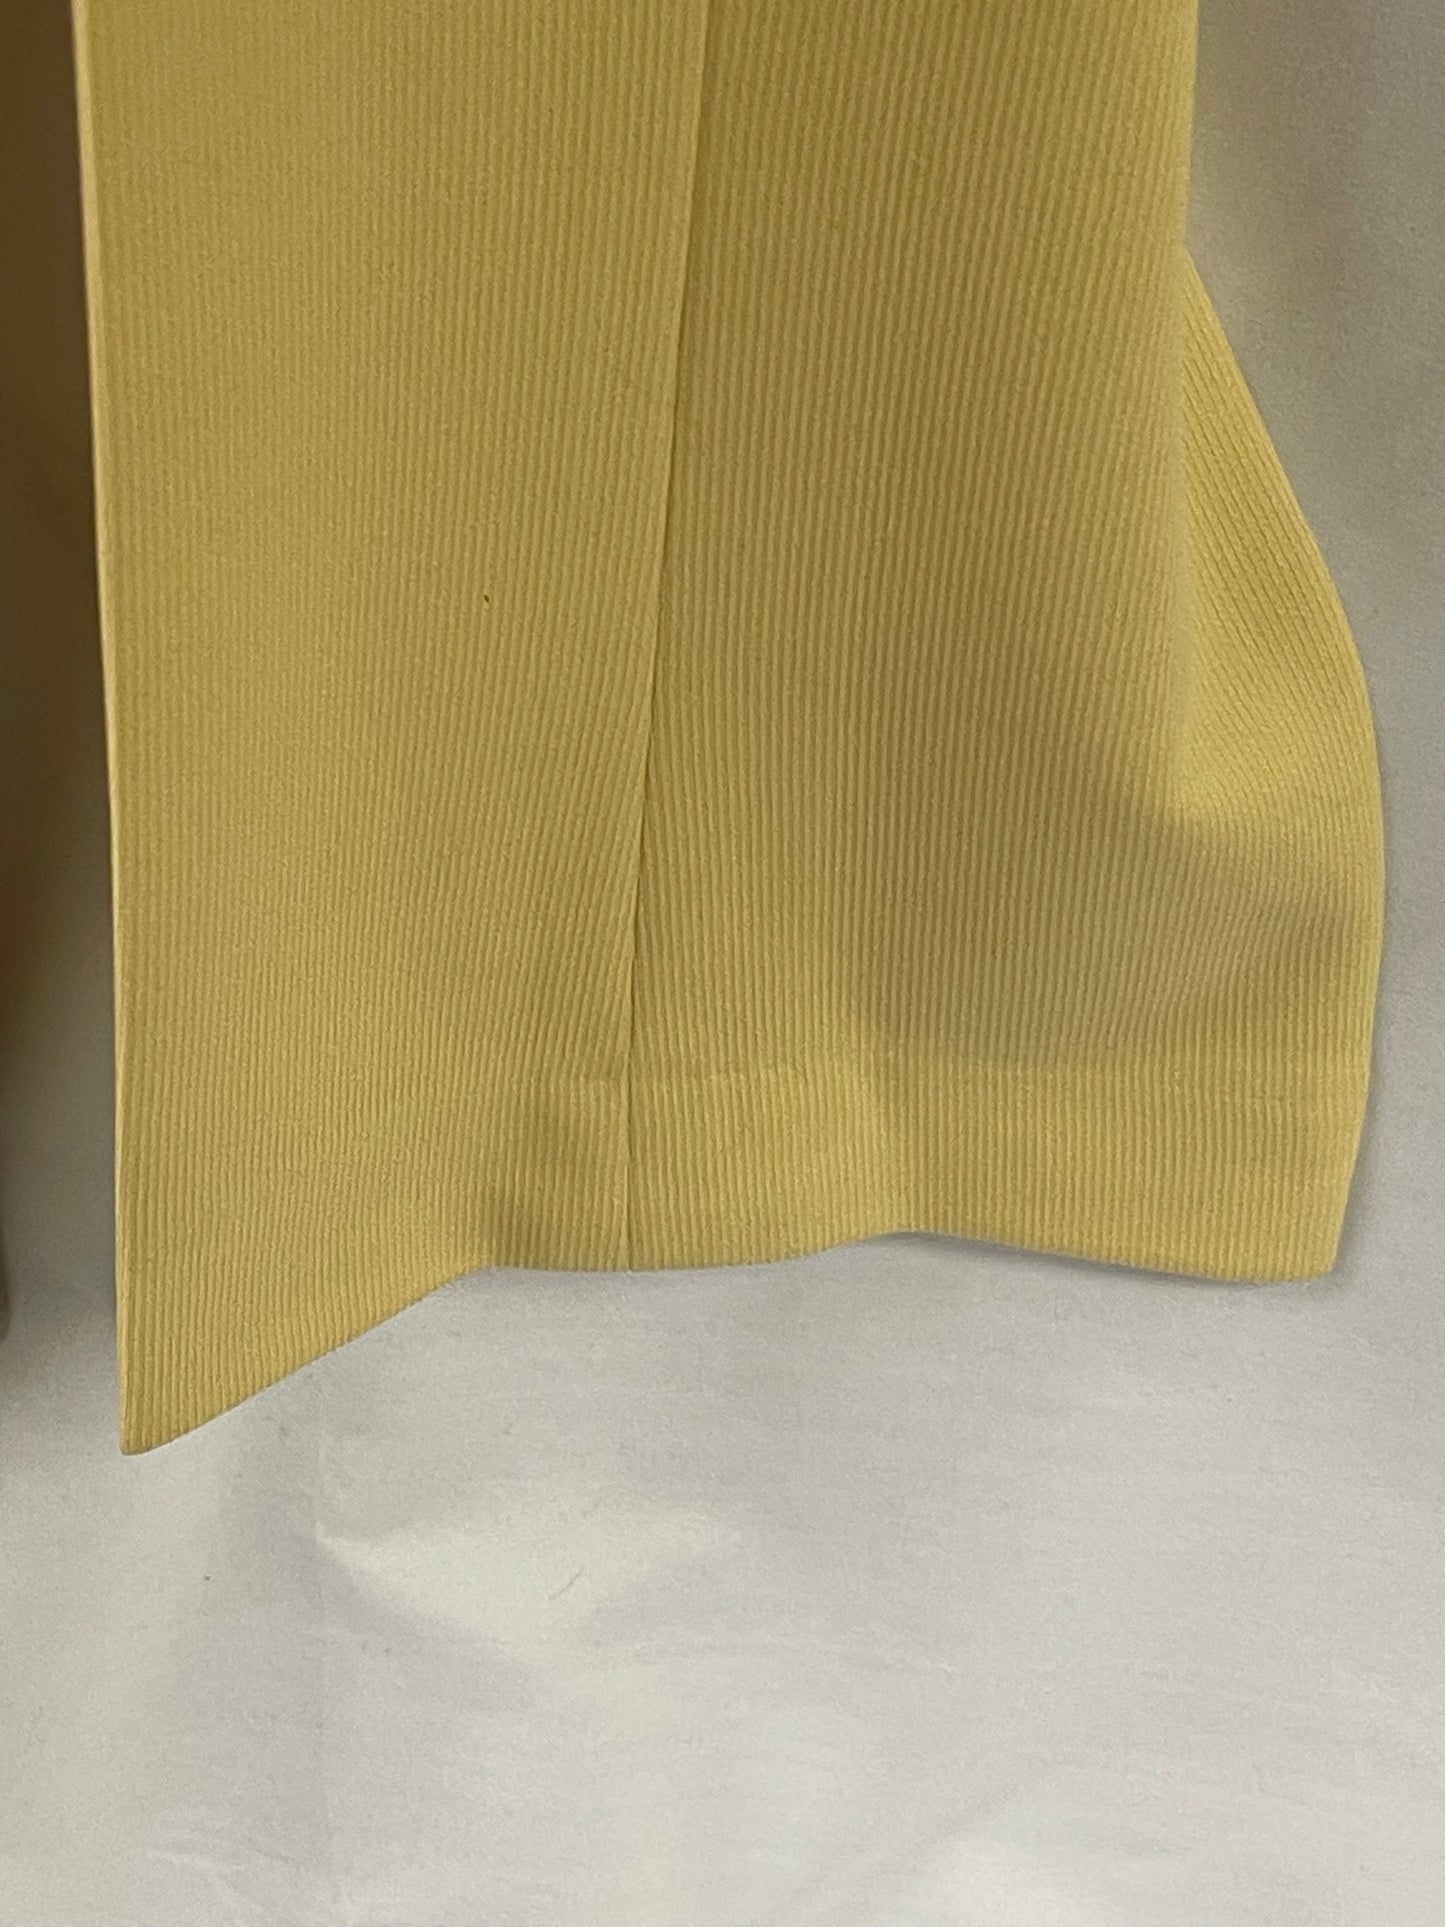 70s Polachek’s Department Store Yellow “Swagger” Pants